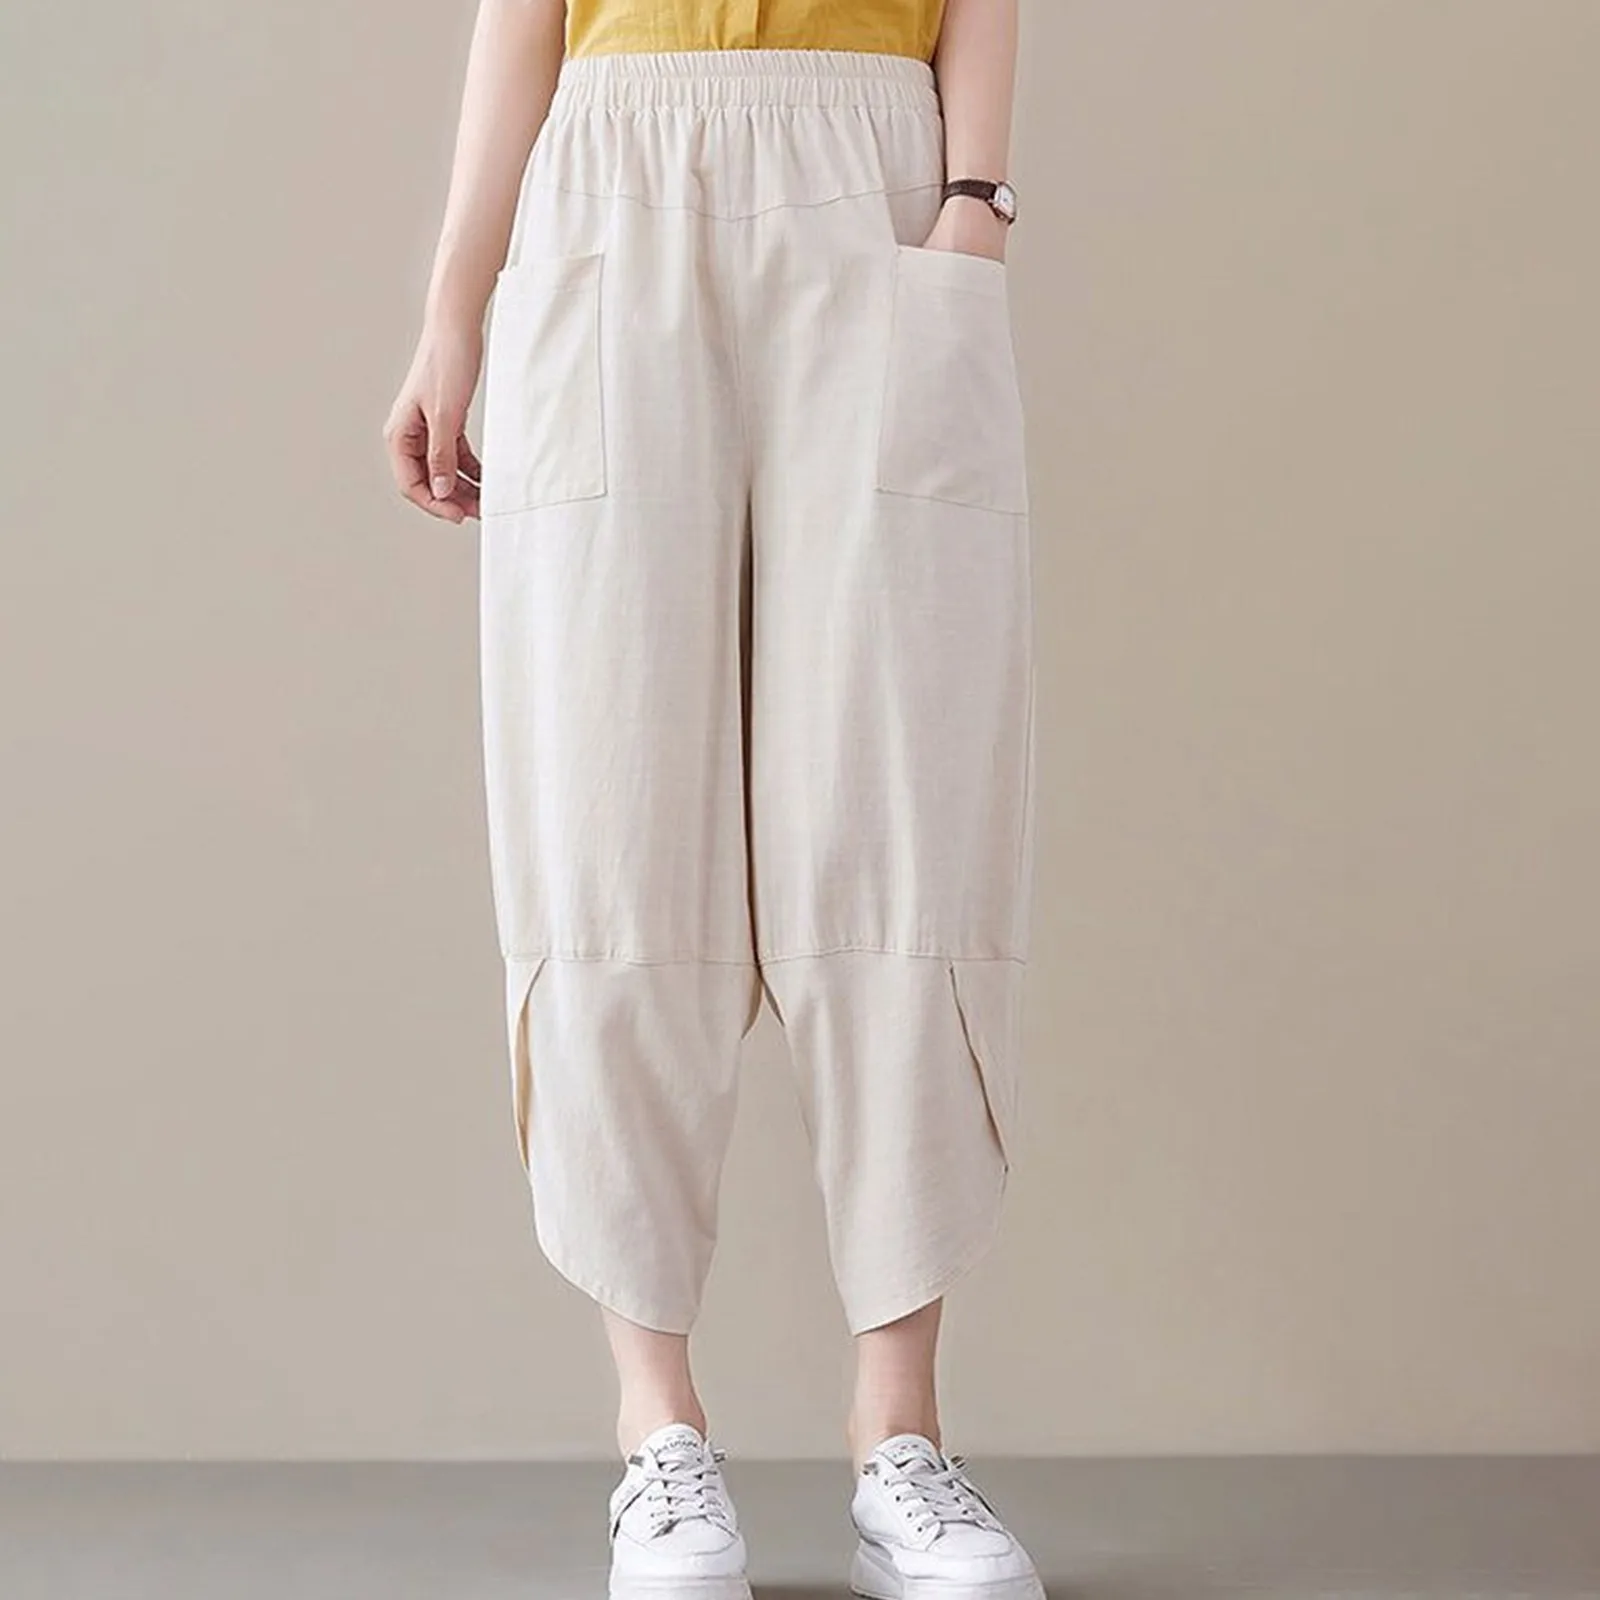 Womens Summer Harem Pants Cotton Linen Solid Elastic Waist Loose Bunched Foot Cropped Pants Female Casual Trousers